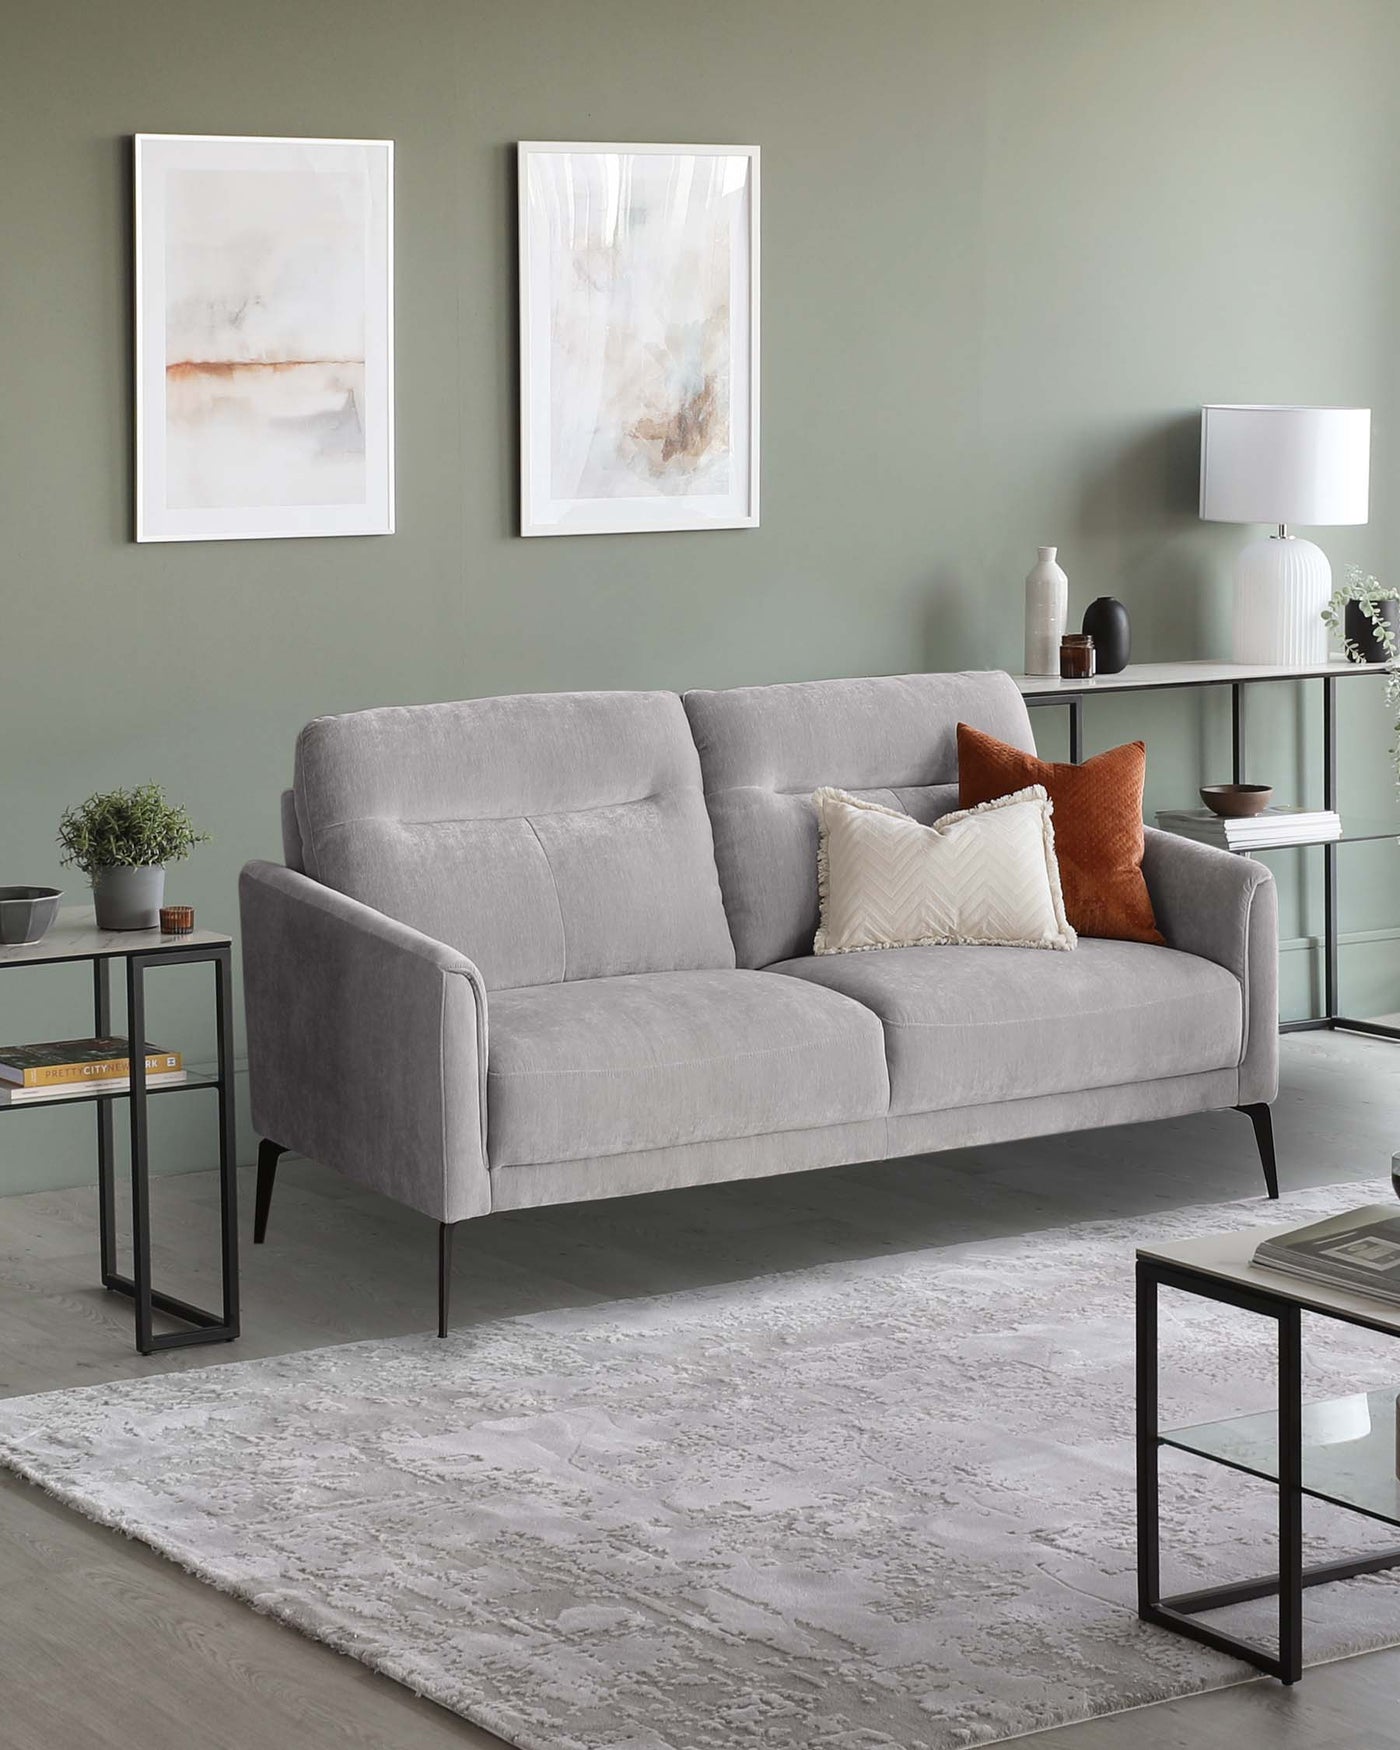 Contemporary three-seater sofa in light grey fabric with sleek armrests and dark angled legs, flanked by two modern side tables with black metal frames and dark wood tops, set on a textured grey area rug over light hardwood flooring.